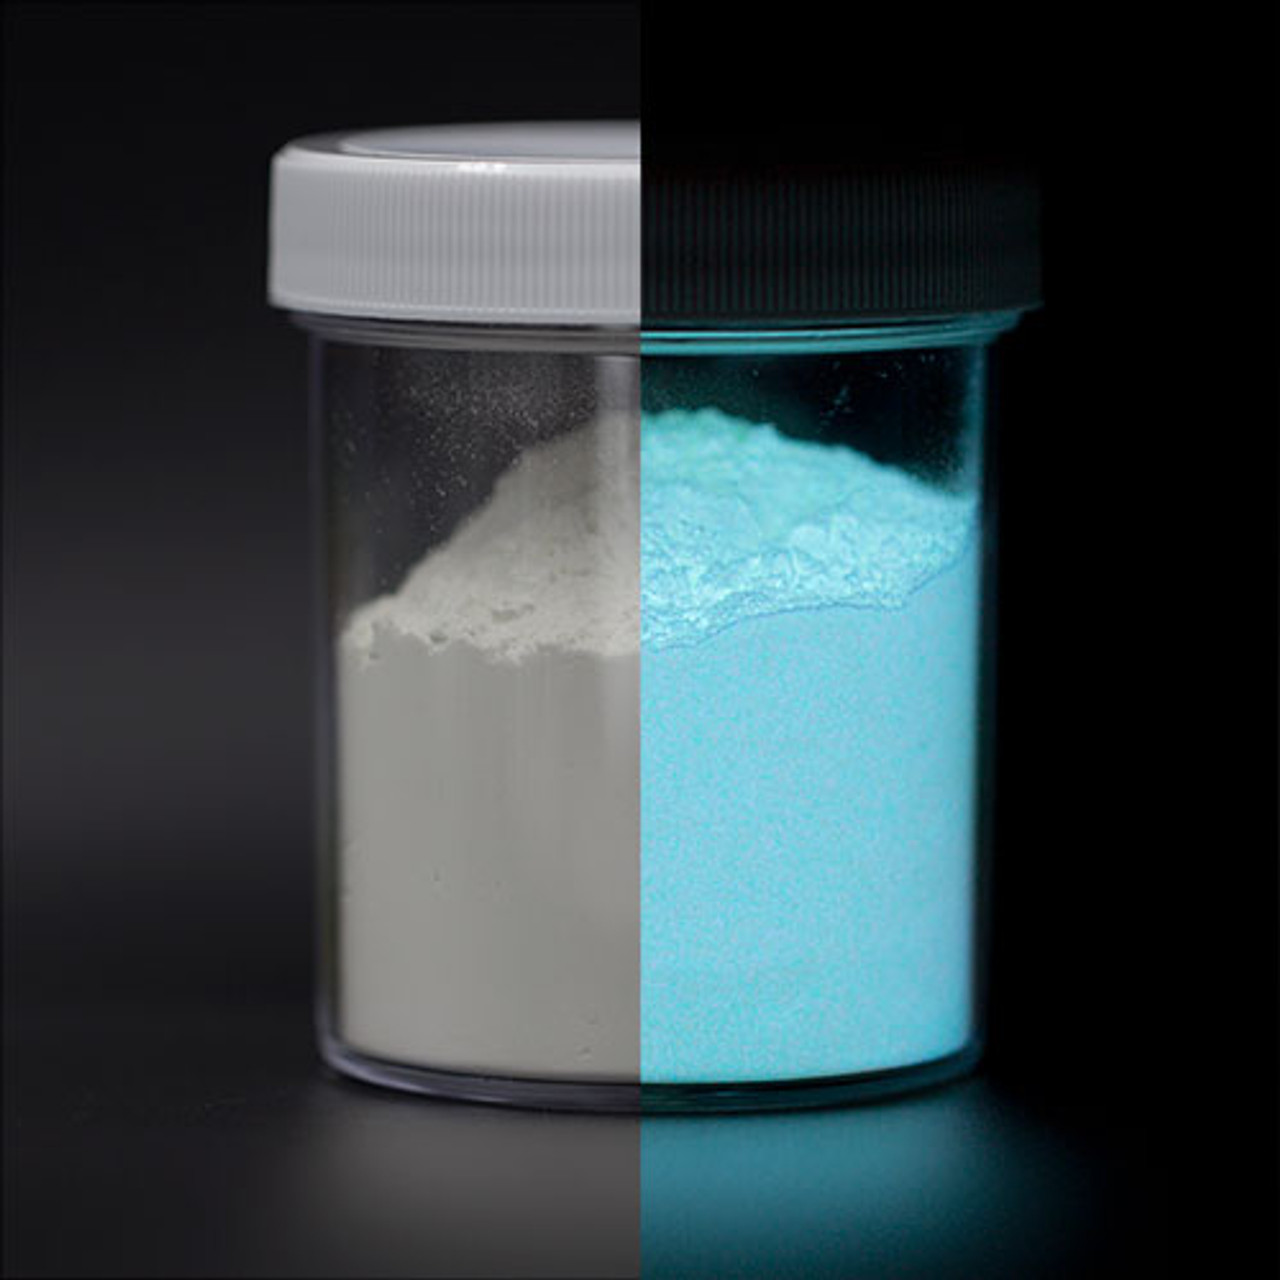 Buy White Glow In The Dark Powder (1 Kg Pack) – Different Colors